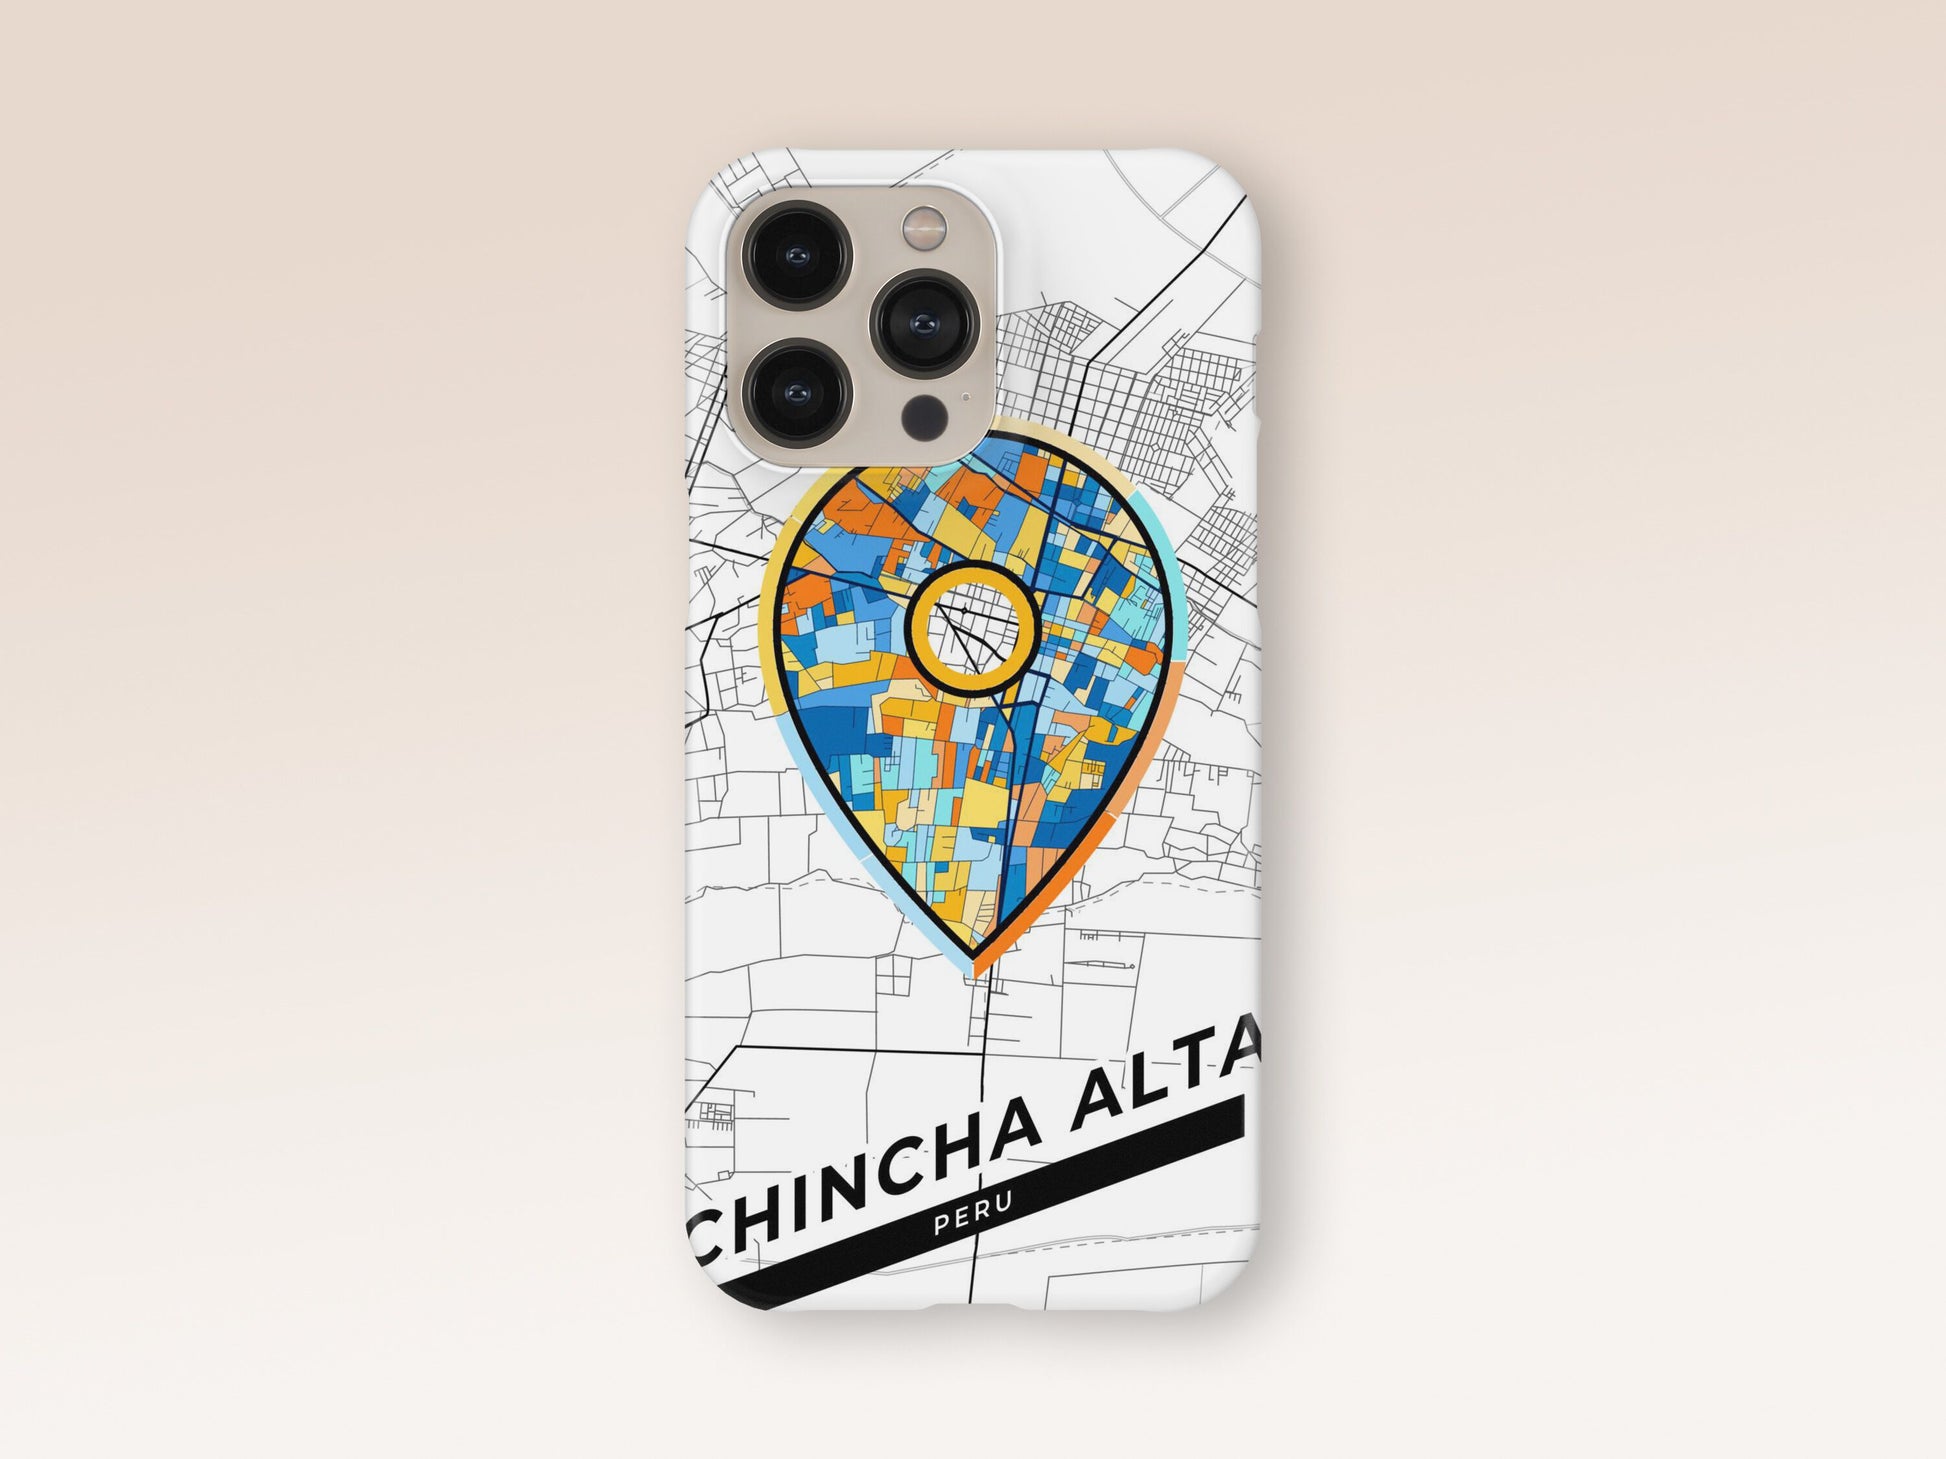 Chincha Alta Peru slim phone case with colorful icon. Birthday, wedding or housewarming gift. Couple match cases. 1